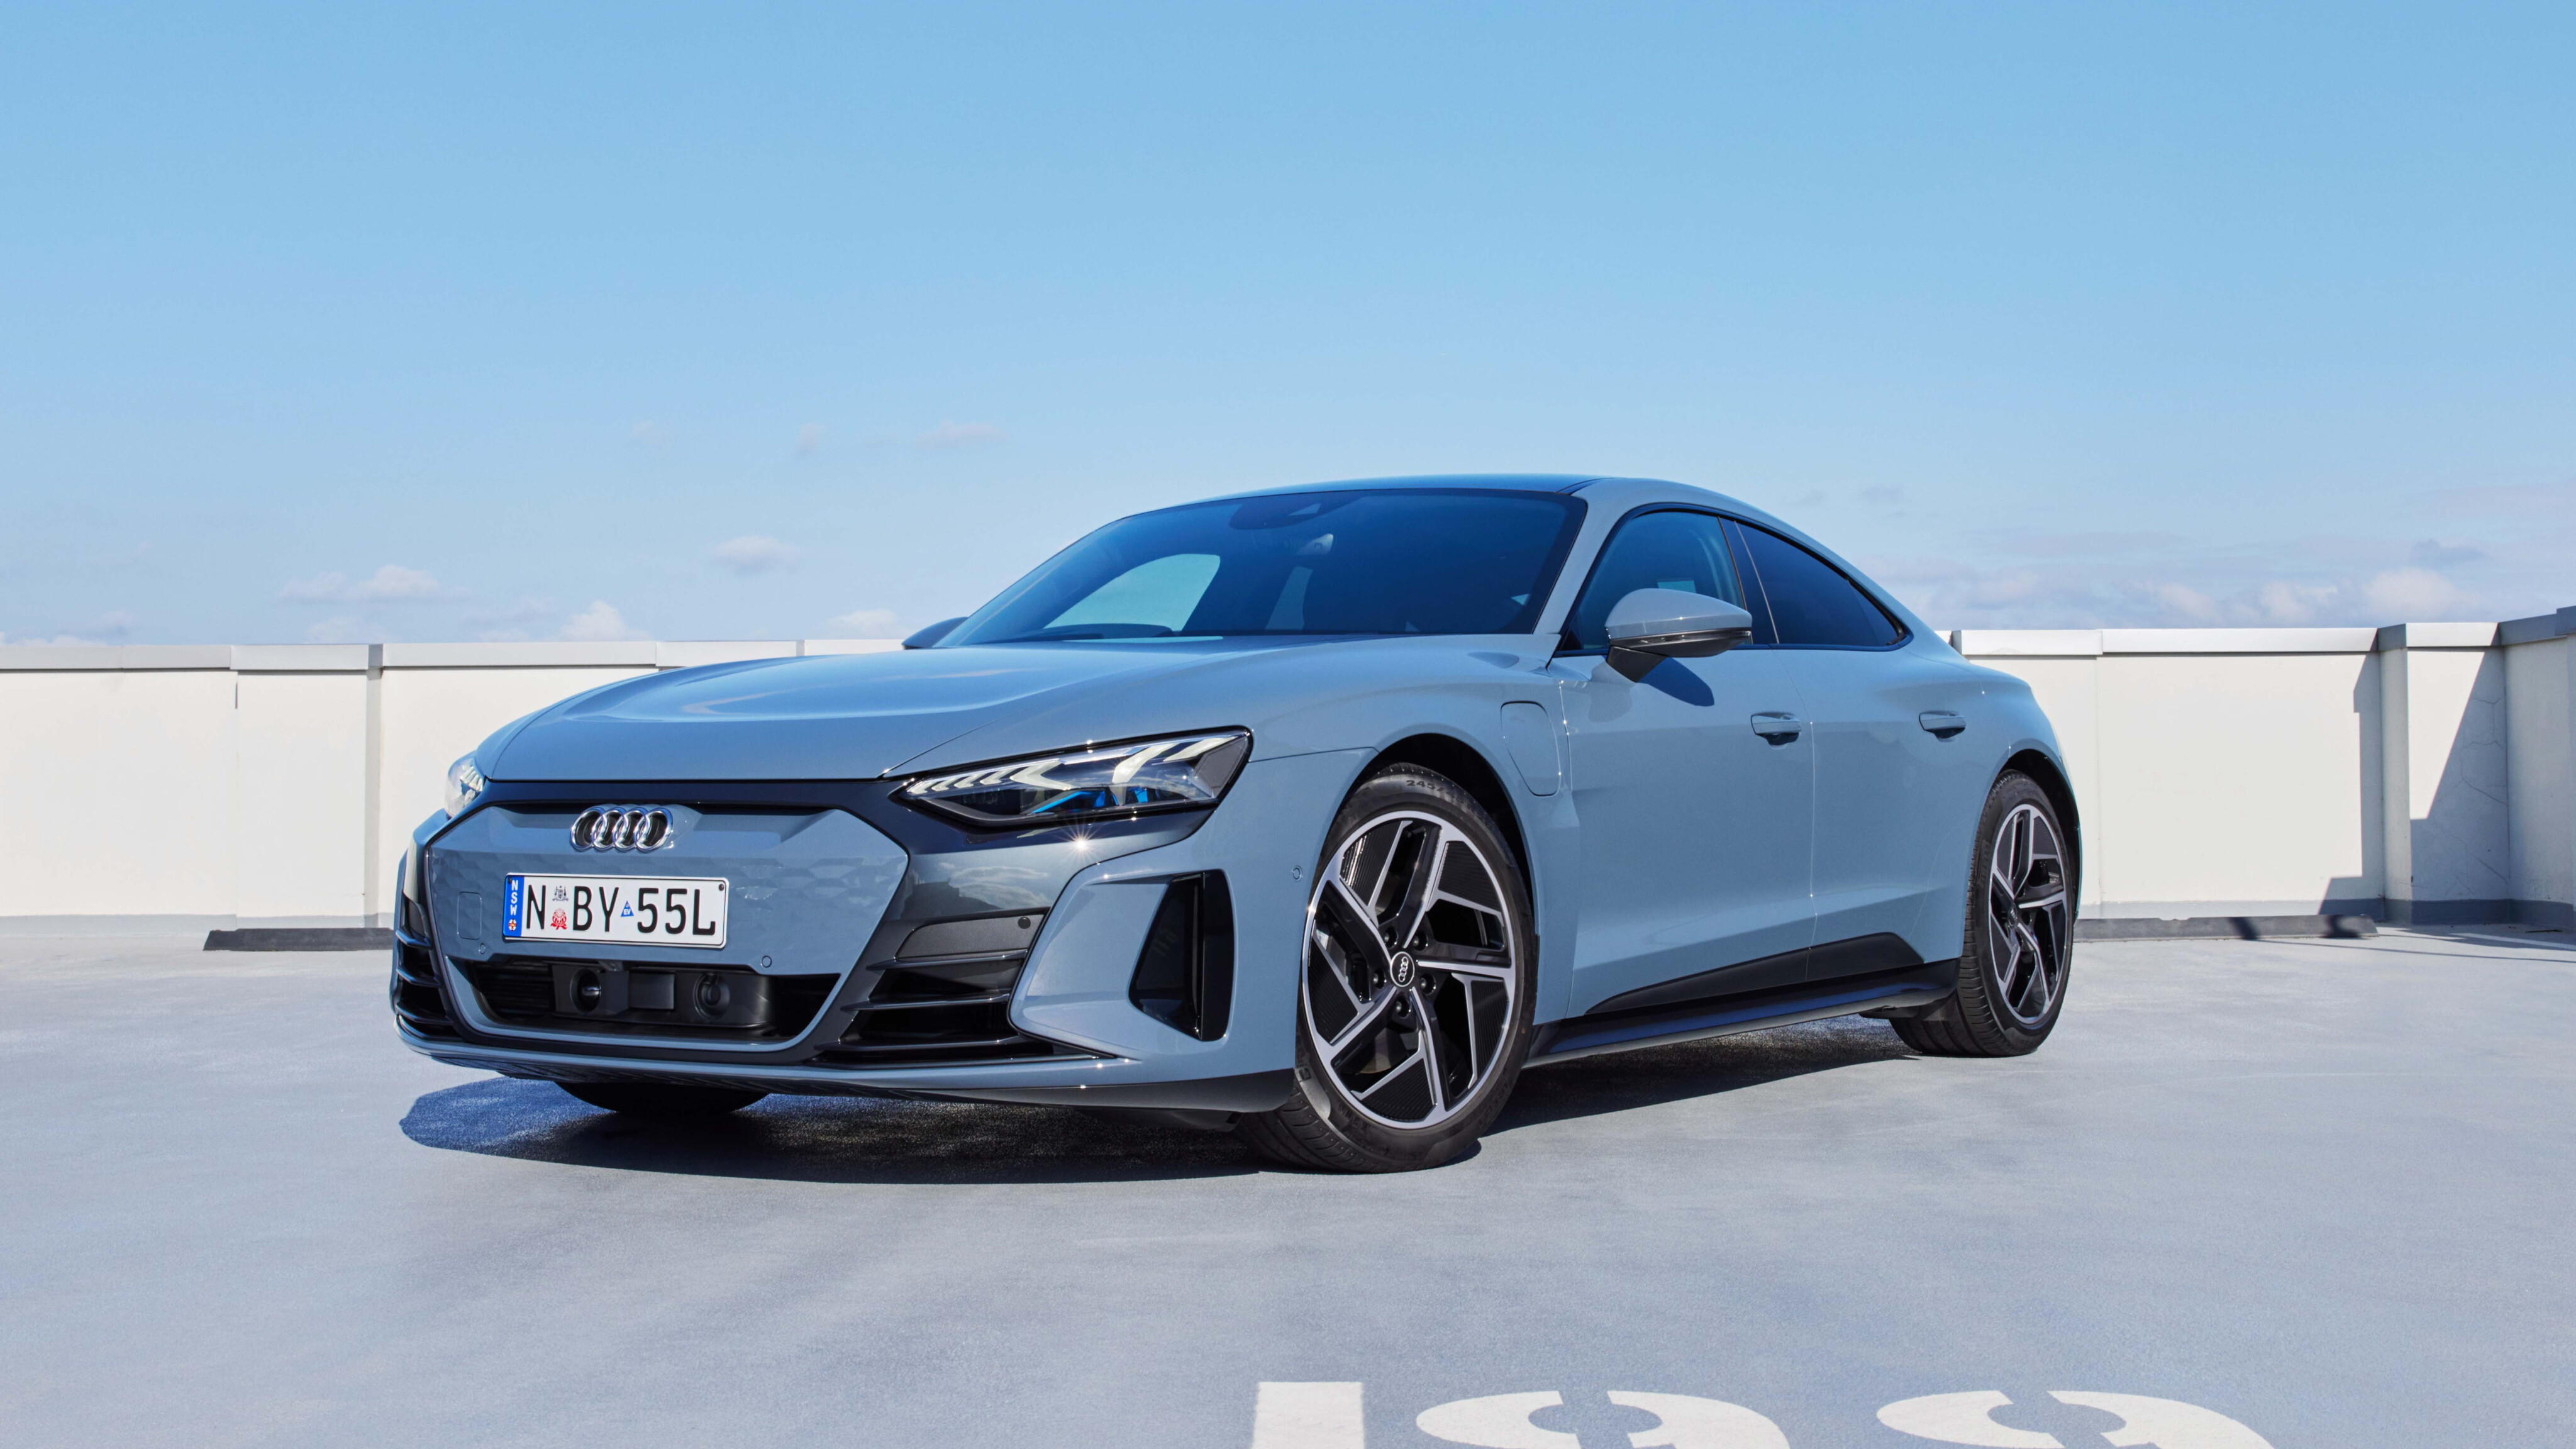 2022 Audi E-Tron GT and RS E-Tron GT price and features for Australia